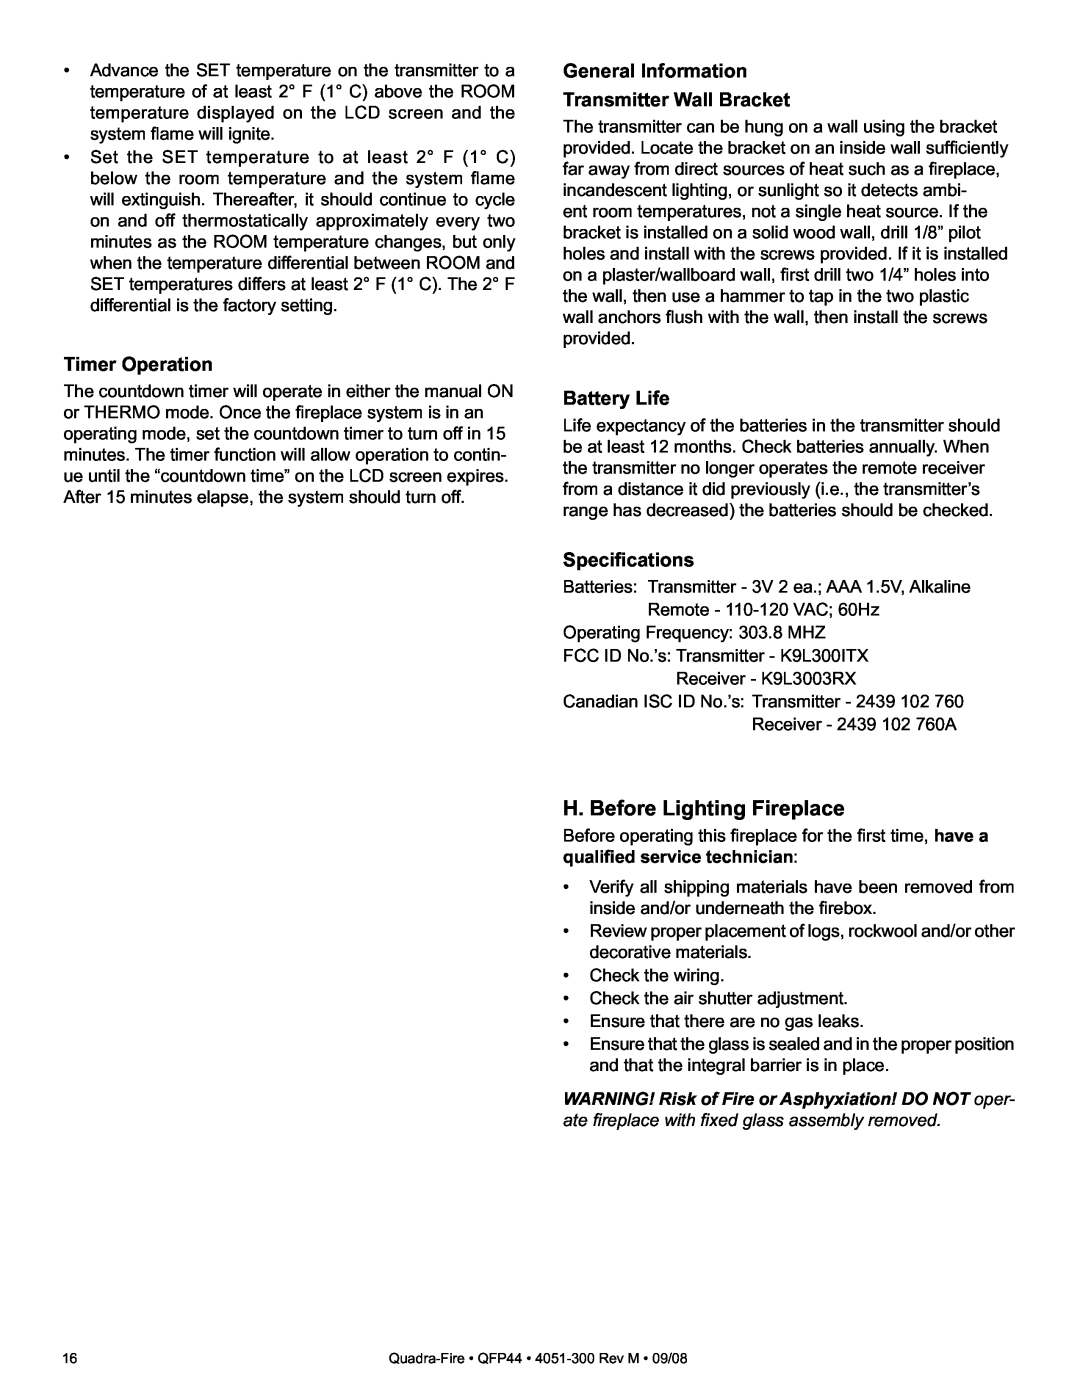 Quadra-Fire QFP44 owner manual H. Before Lighting Fireplace, Timer Operation, General Information Transmitter Wall Bracket 